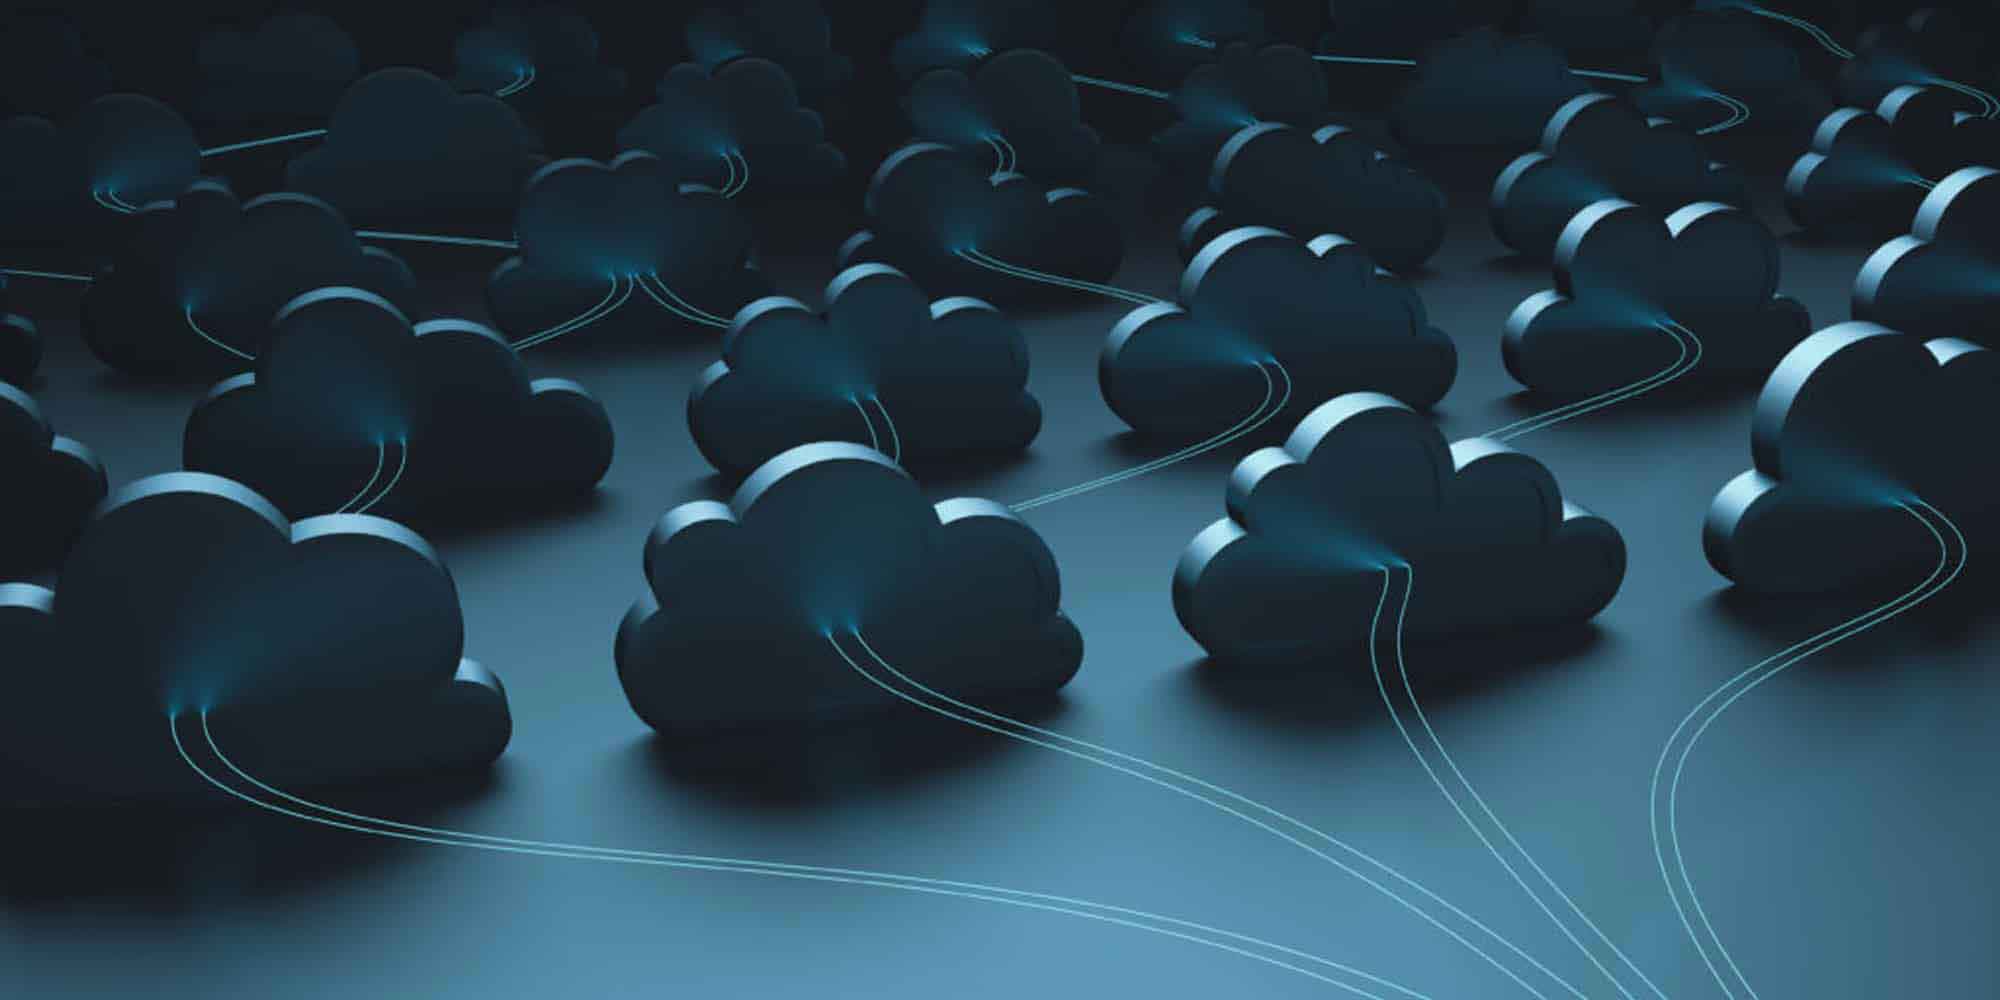 In a Multi-Cloud World, It’s Time to Rethink Who Has Access To What